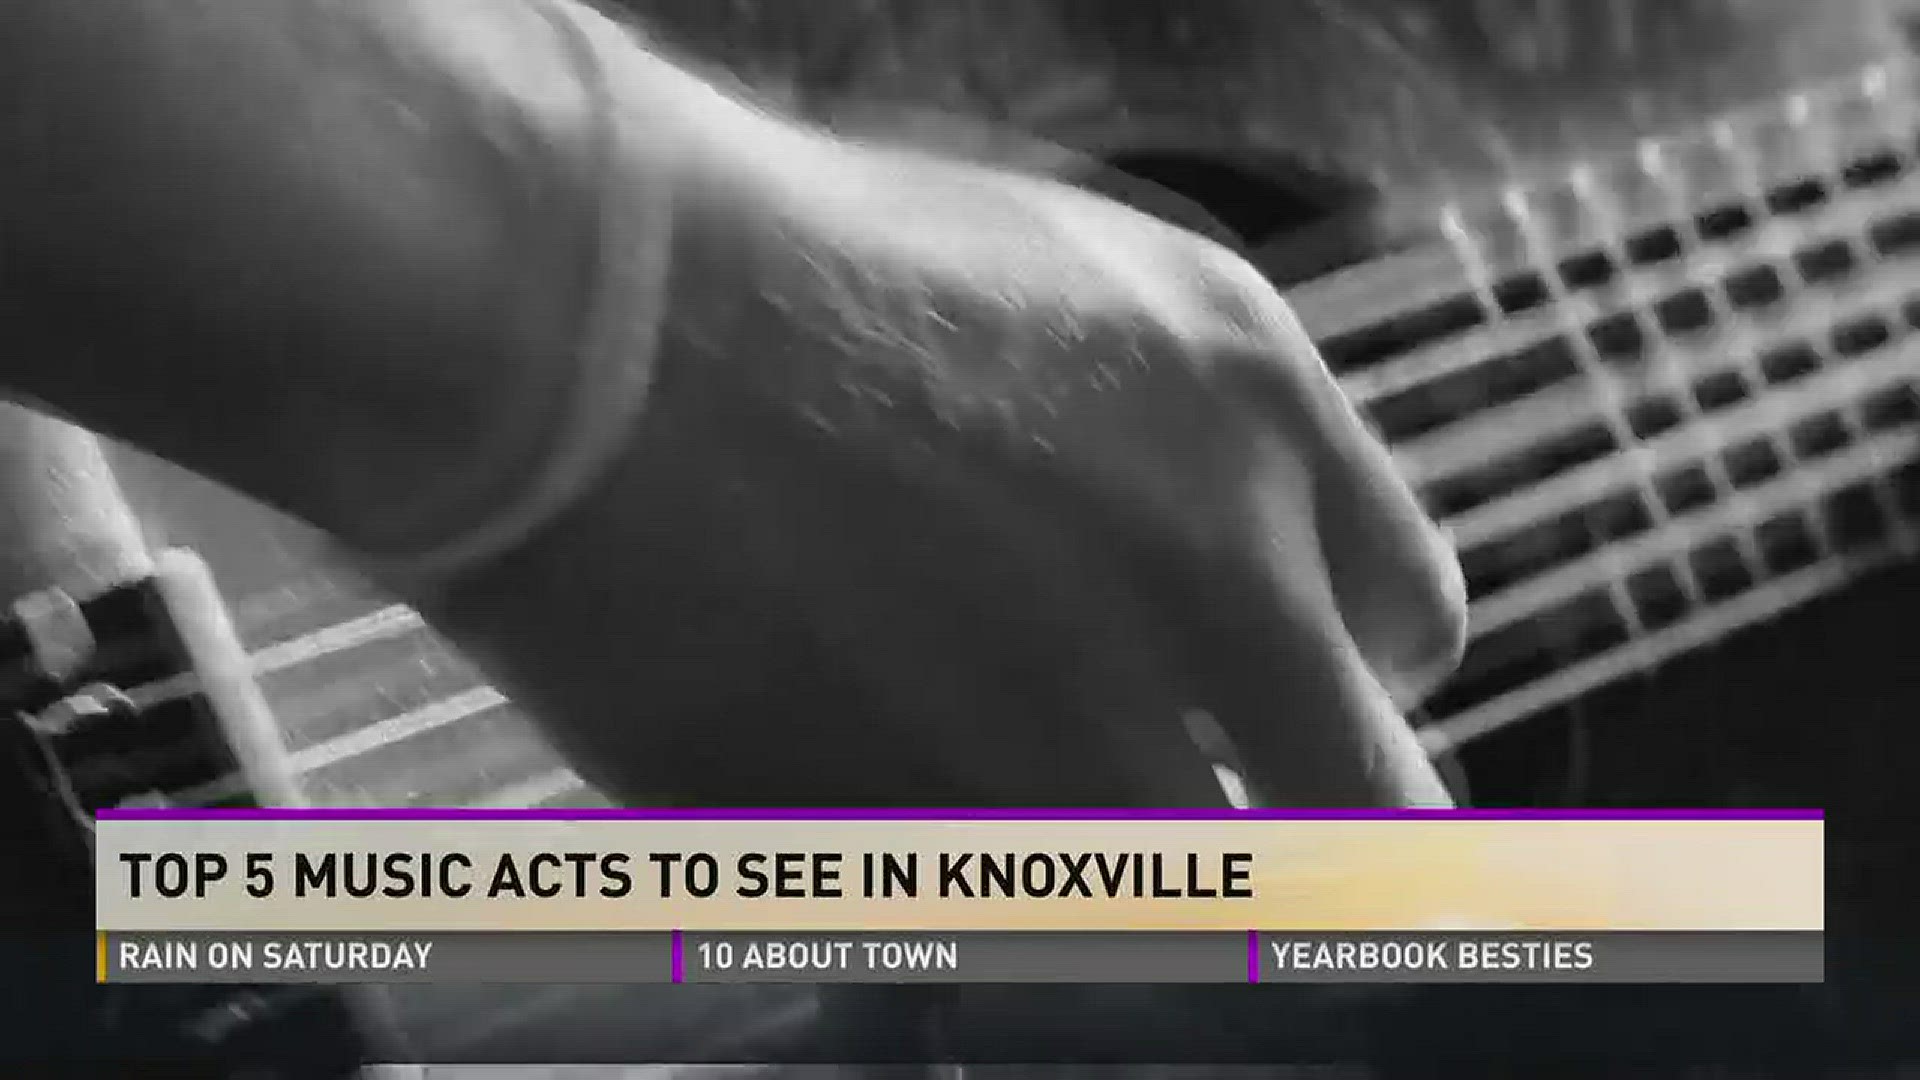 Top 5 Music Acts To See In Knoxville